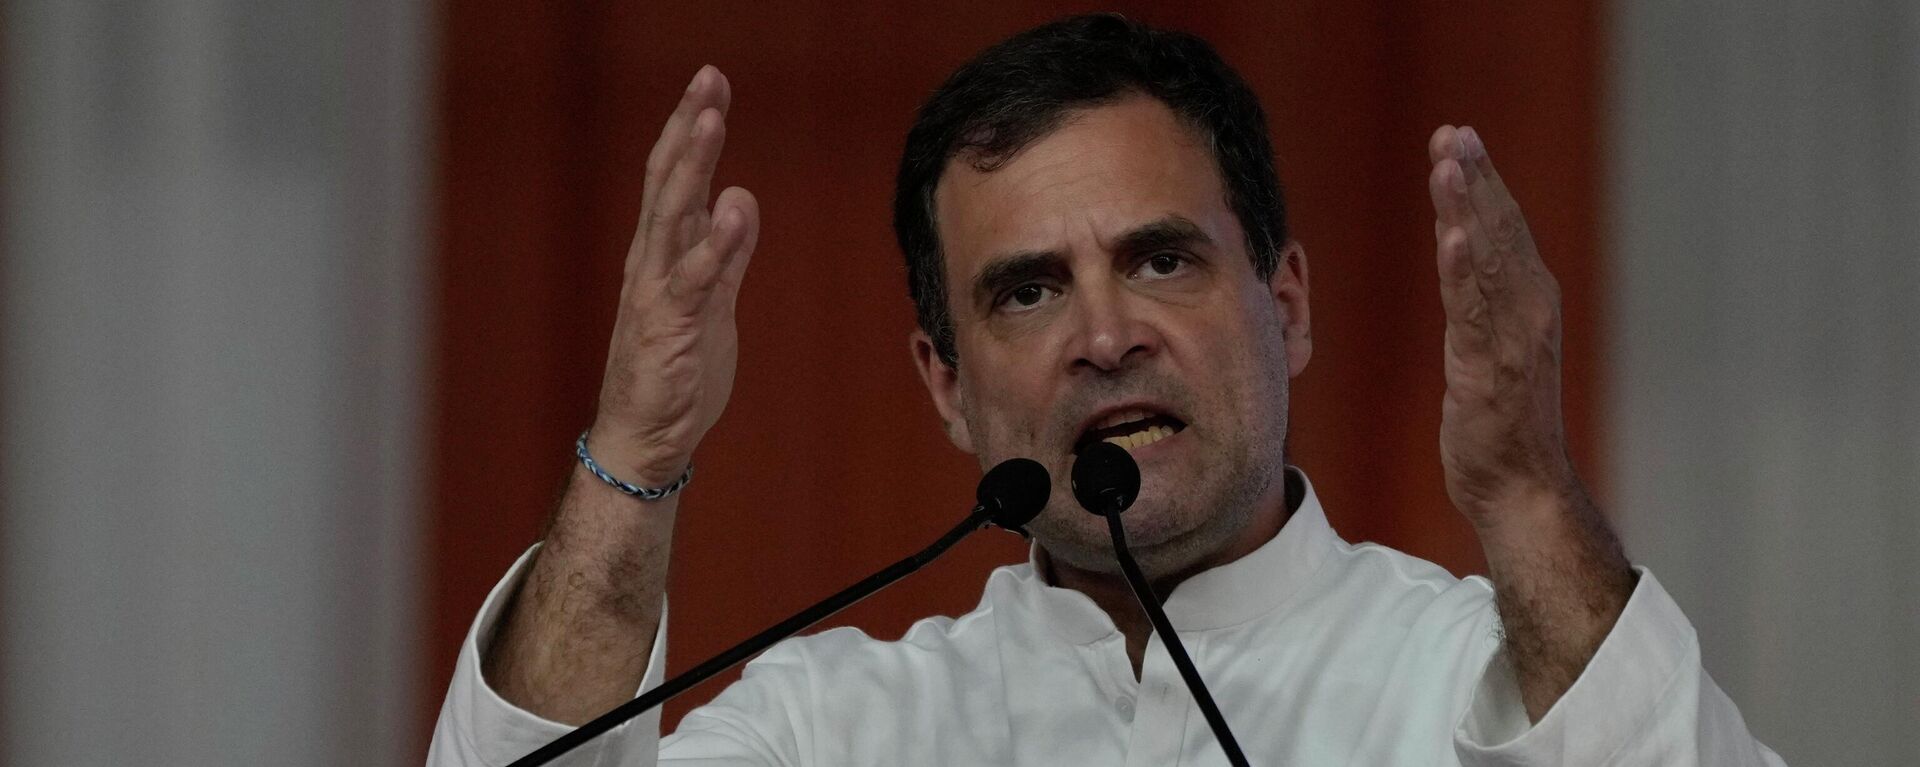 India's opposition Congress party leader Rahul Gandhi speaks during a meeting of his party workers in Ahmedabad, India, Monday, Sept. 5, 2022 - Sputnik International, 1920, 22.09.2022